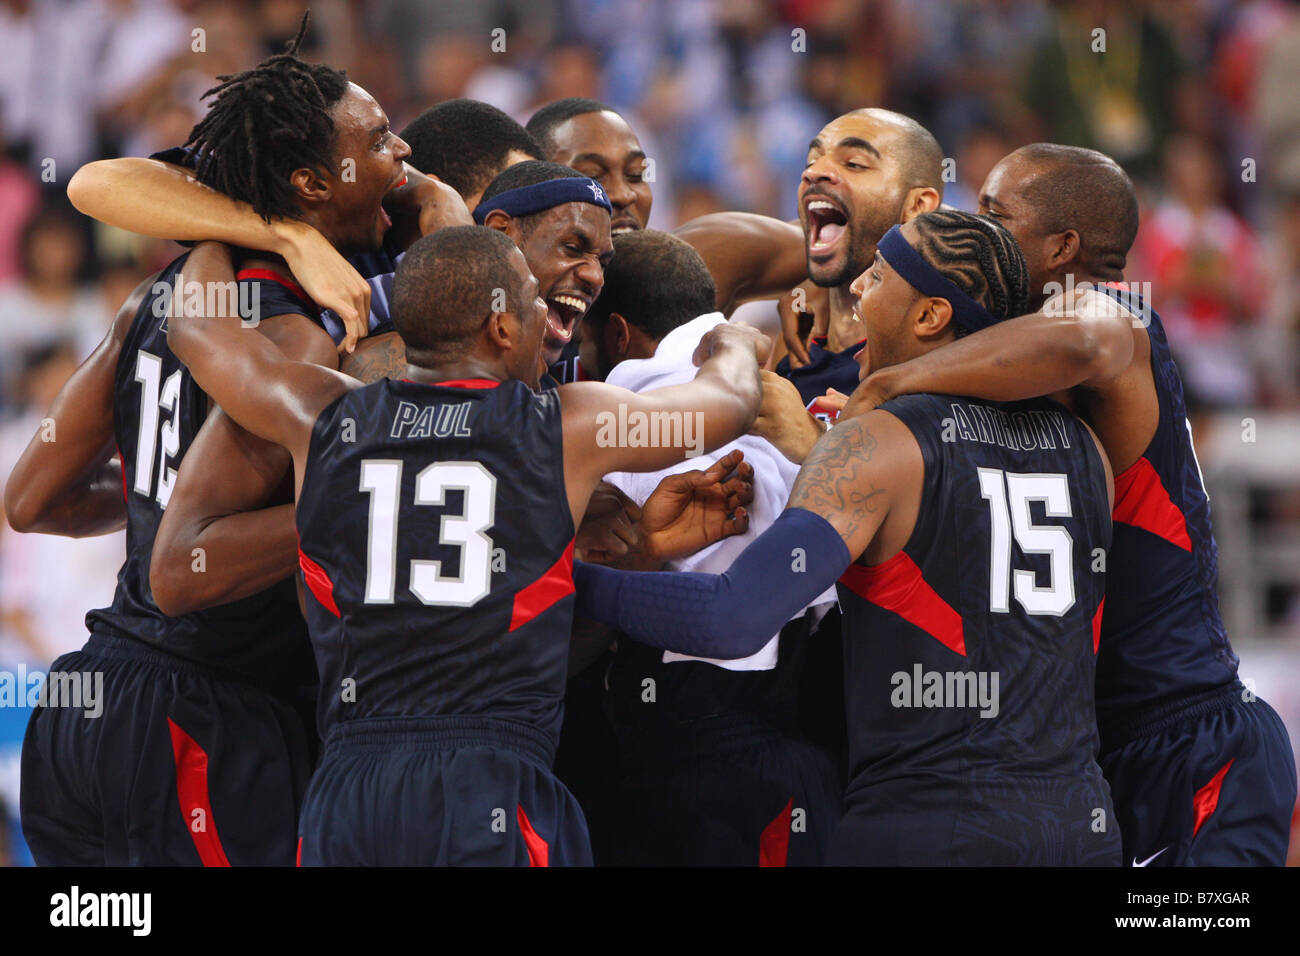 United States team group USA AUGUST 24 2008 Basketball Beijing 2008 Olympic Games Mens Basketball Final match between United States and Spain at the Beijing Olympic Basketball Gymnasium in Beijing China Photo by Daiju Kitamura AFLO SPORT 1045 Stock Photo